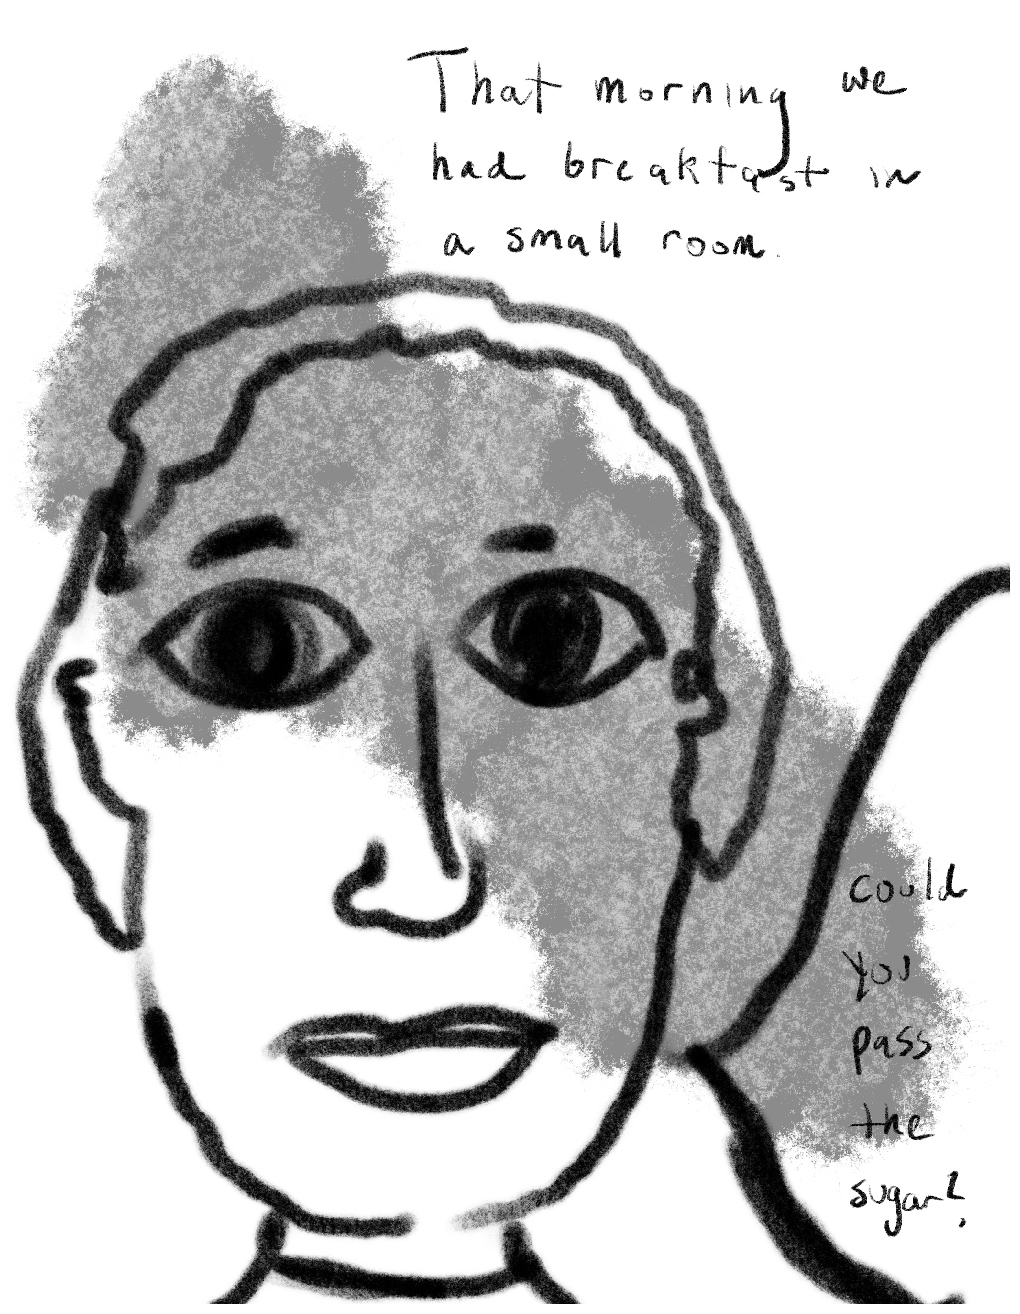 Panel one of a four-panel comic called 'A shared experience', consisting of thick black line drawing and hand written text against a grey and white background. Text at the top of the panel says "That morning we had breakfast in a small room." Most of the panel is filled by a crude drawing of the head and shoulders of a young man with short hair, large eyes and a slight smile. A speech bubble from the young man says "could you pass the sugar?"